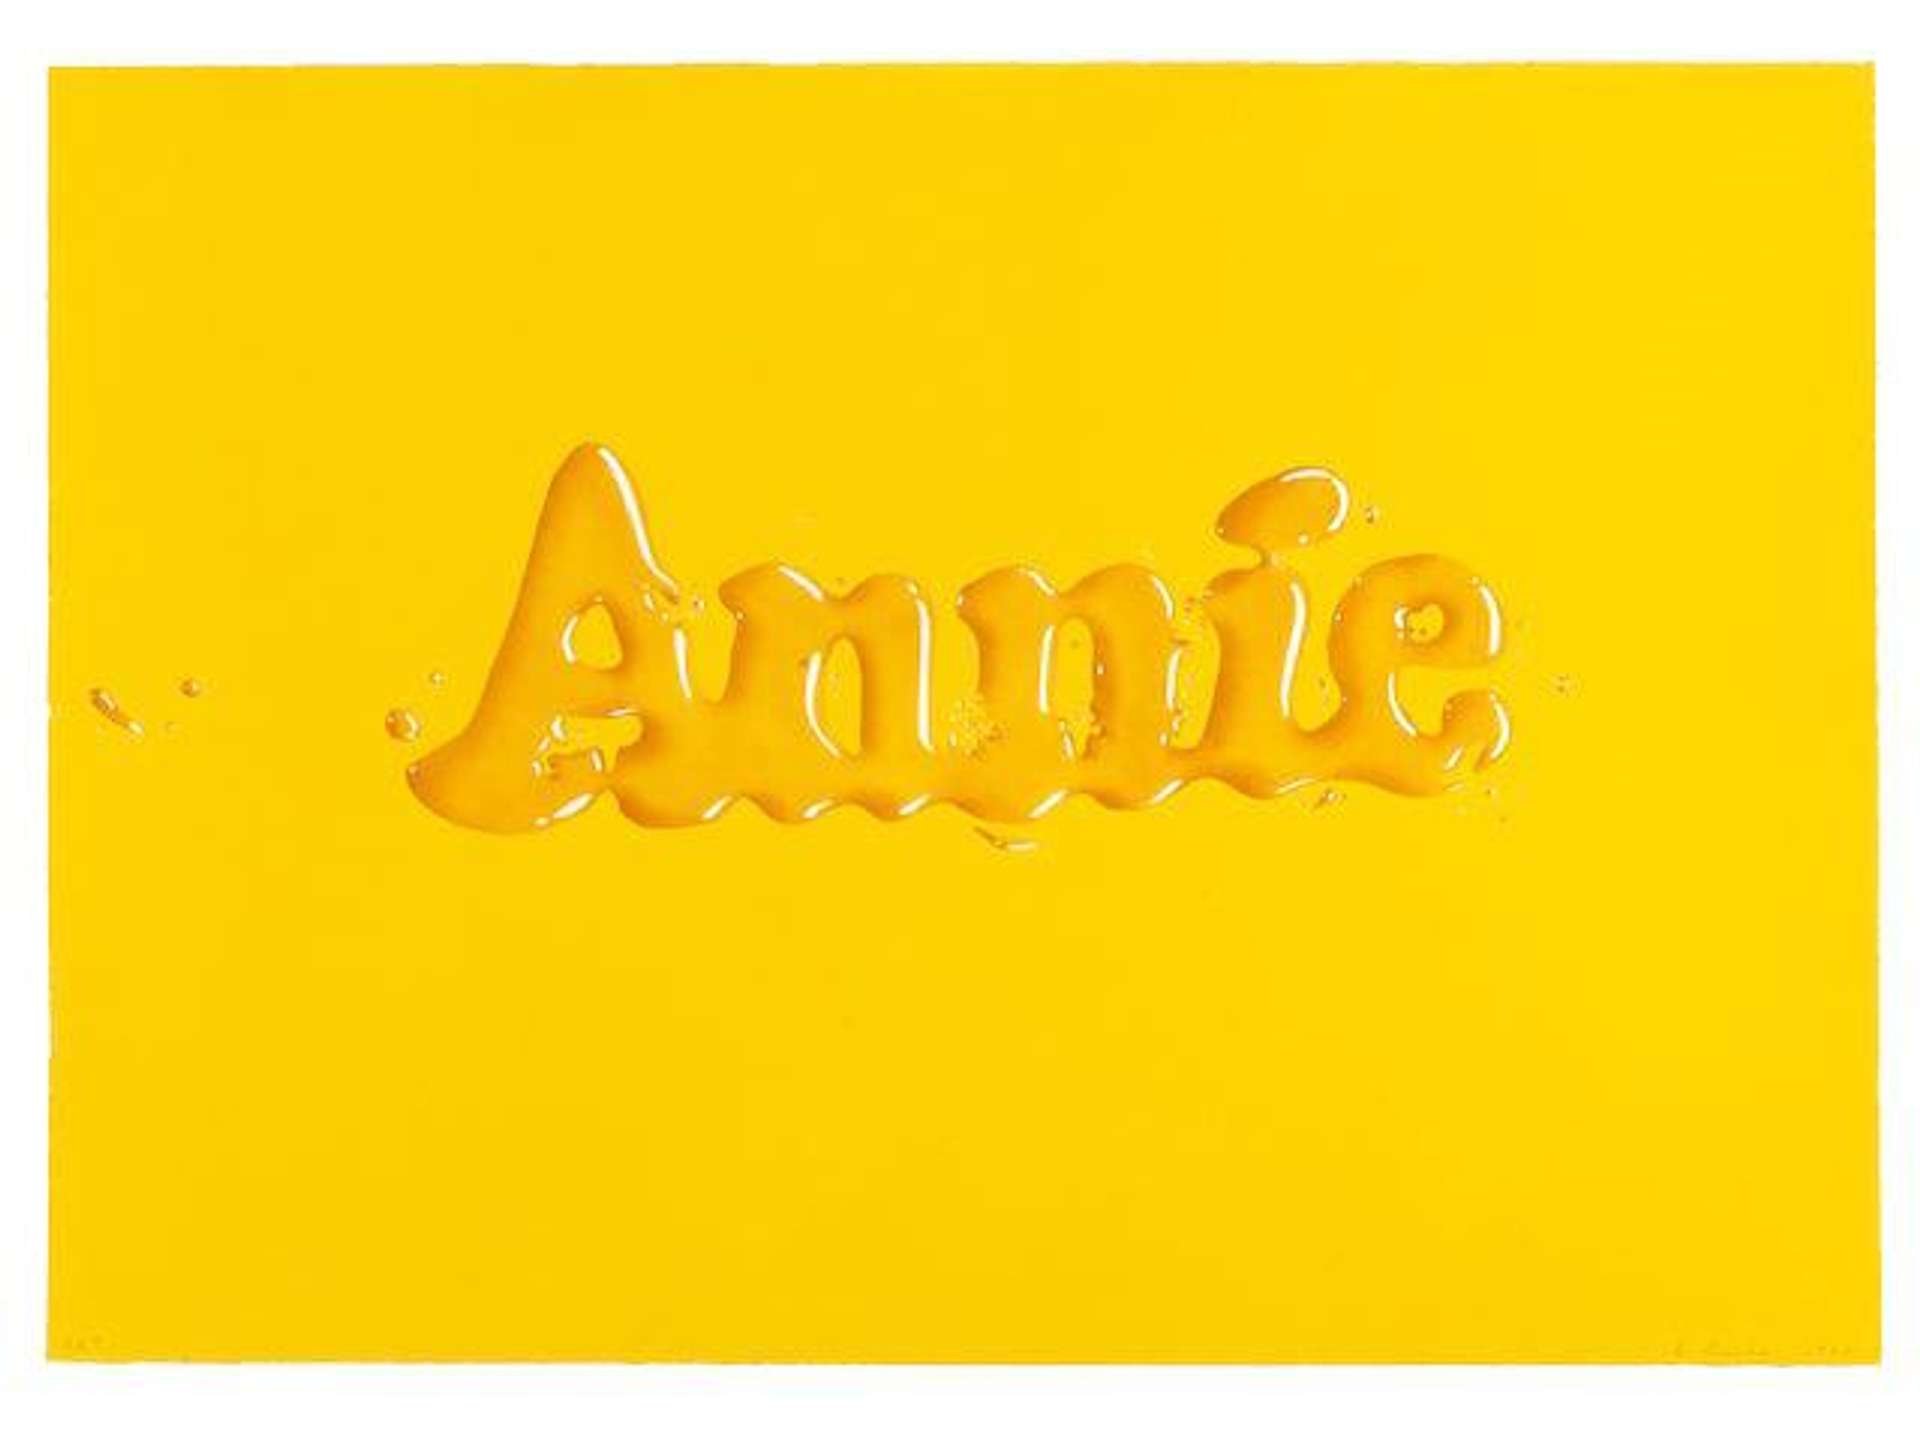 Painting by Ed Ruscha of the name 'Annie' in bold lettering. The letters resemble glossy poured maple syrup and are set against a bold yellow background.